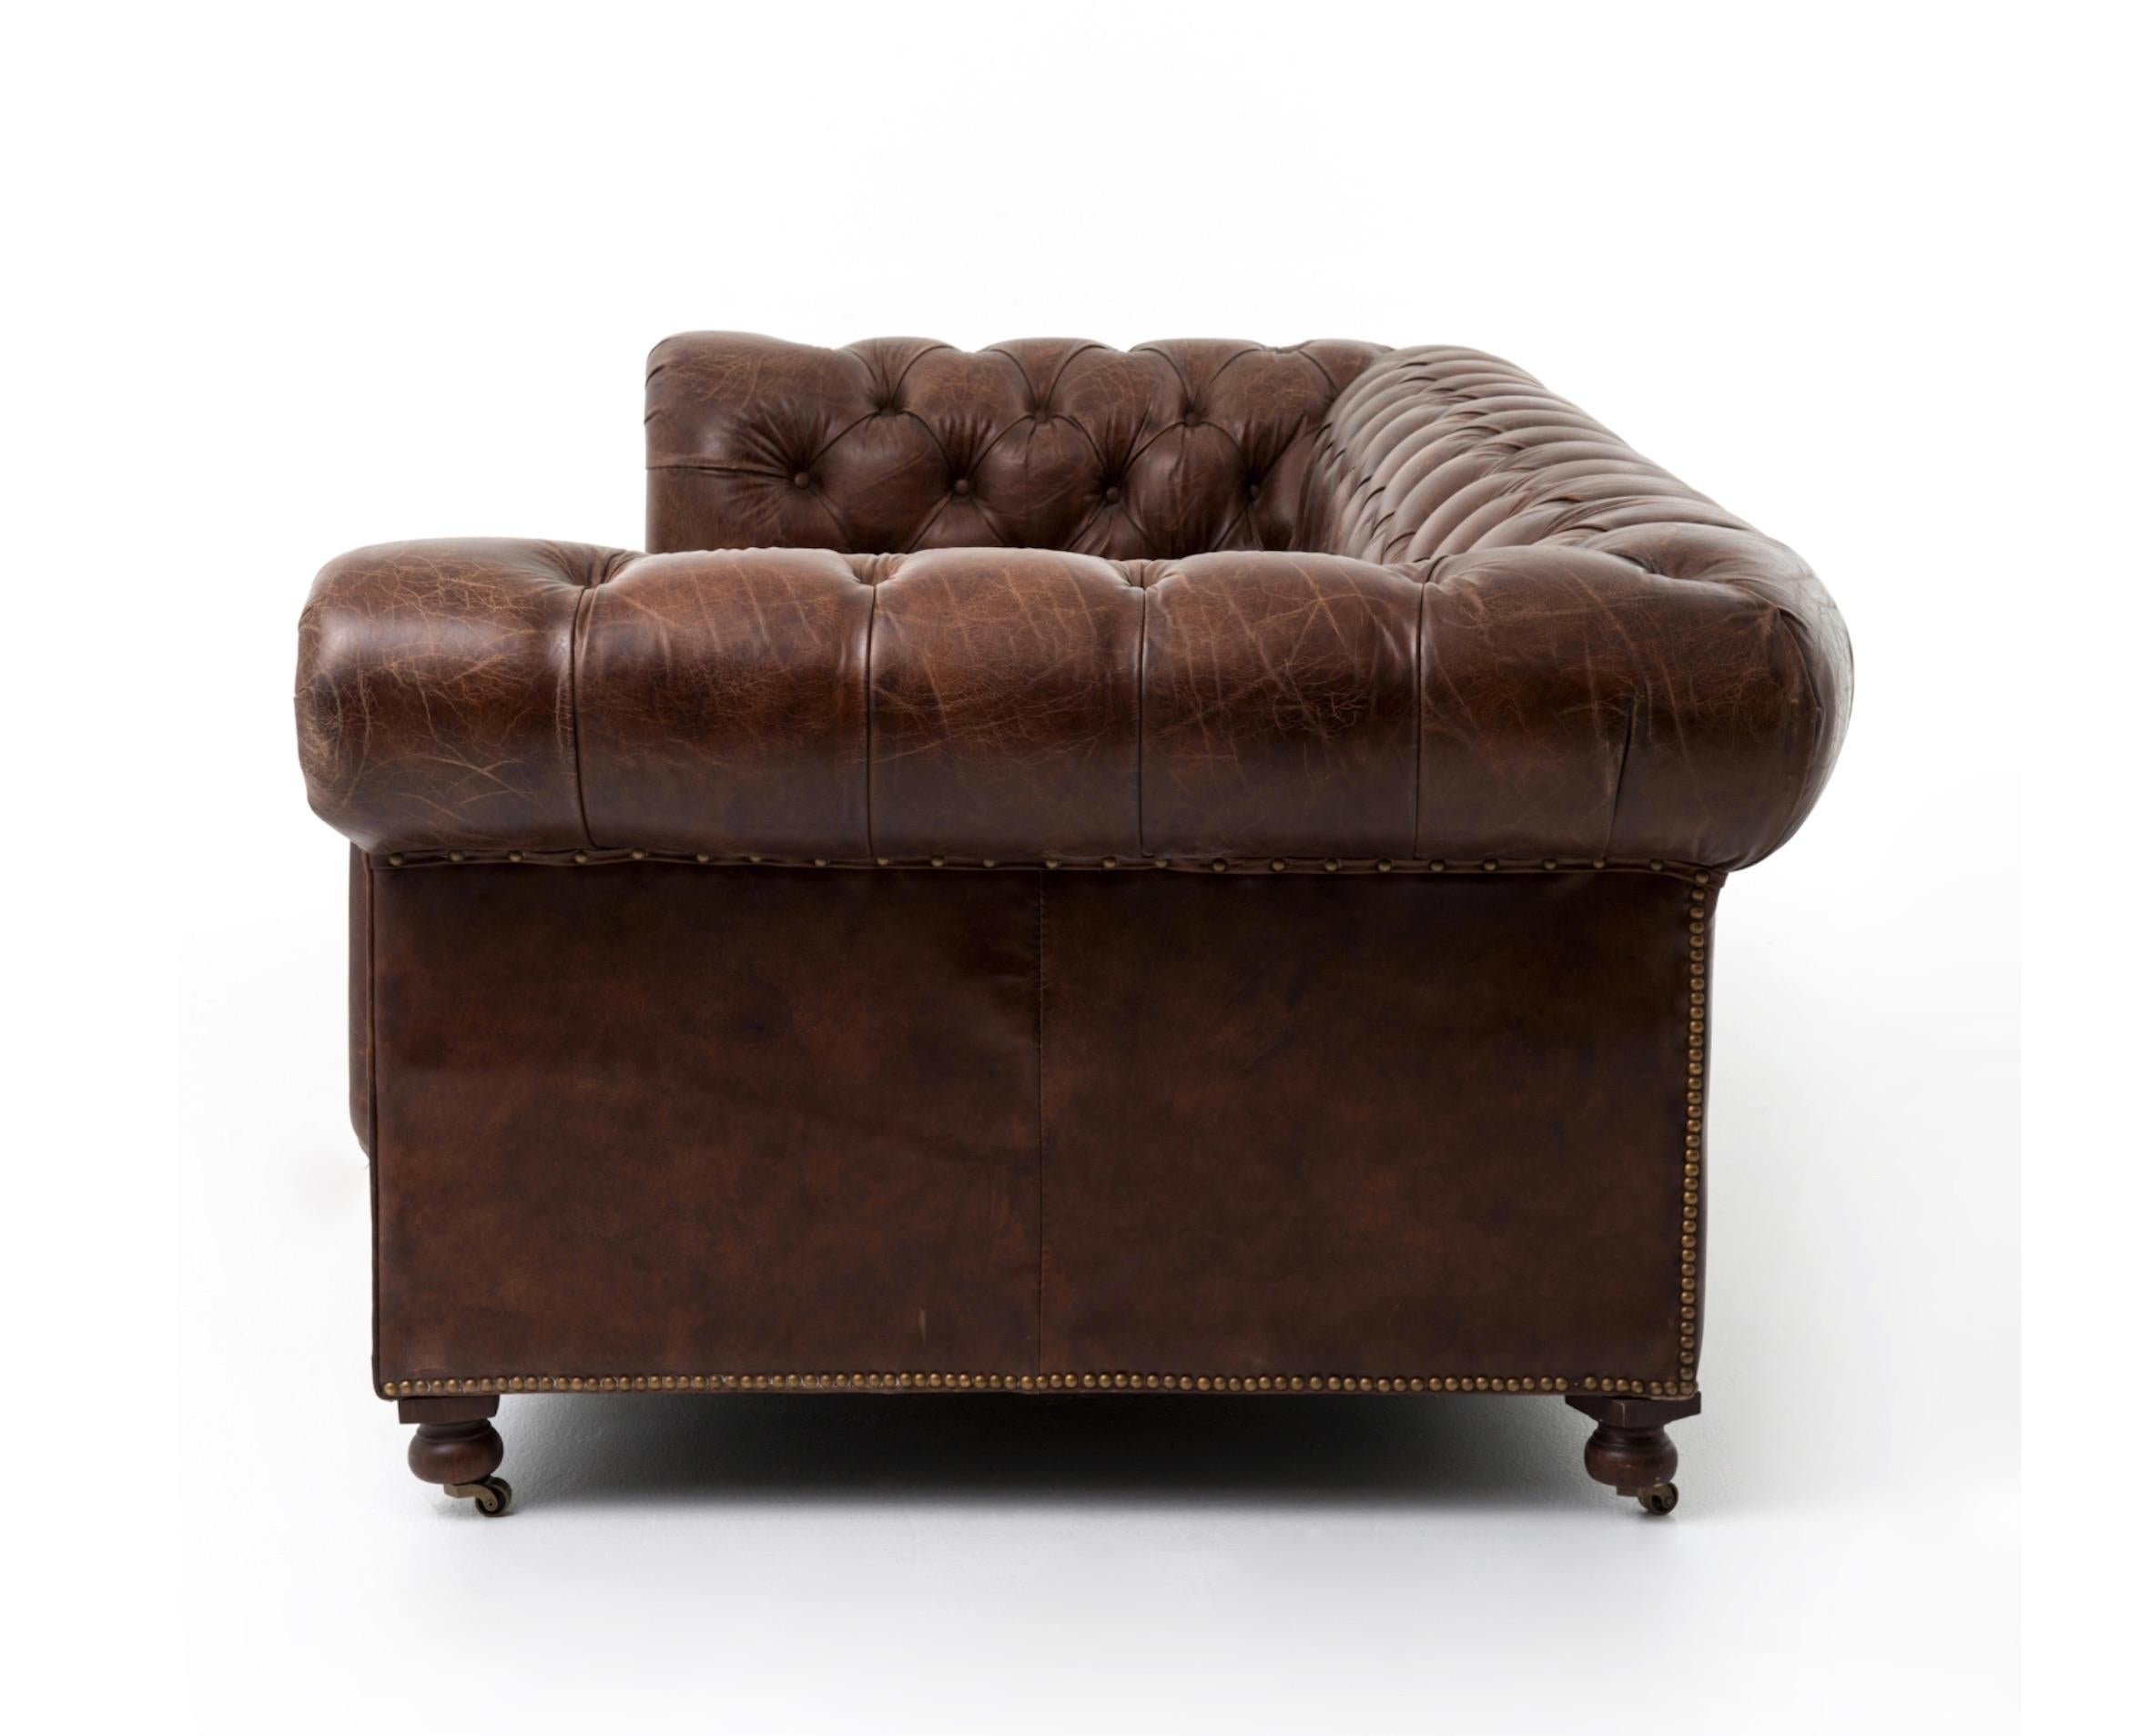 Wood Pair of Monumental Distressed Leather Chesterfield Sofas. Priced Per Sofa.